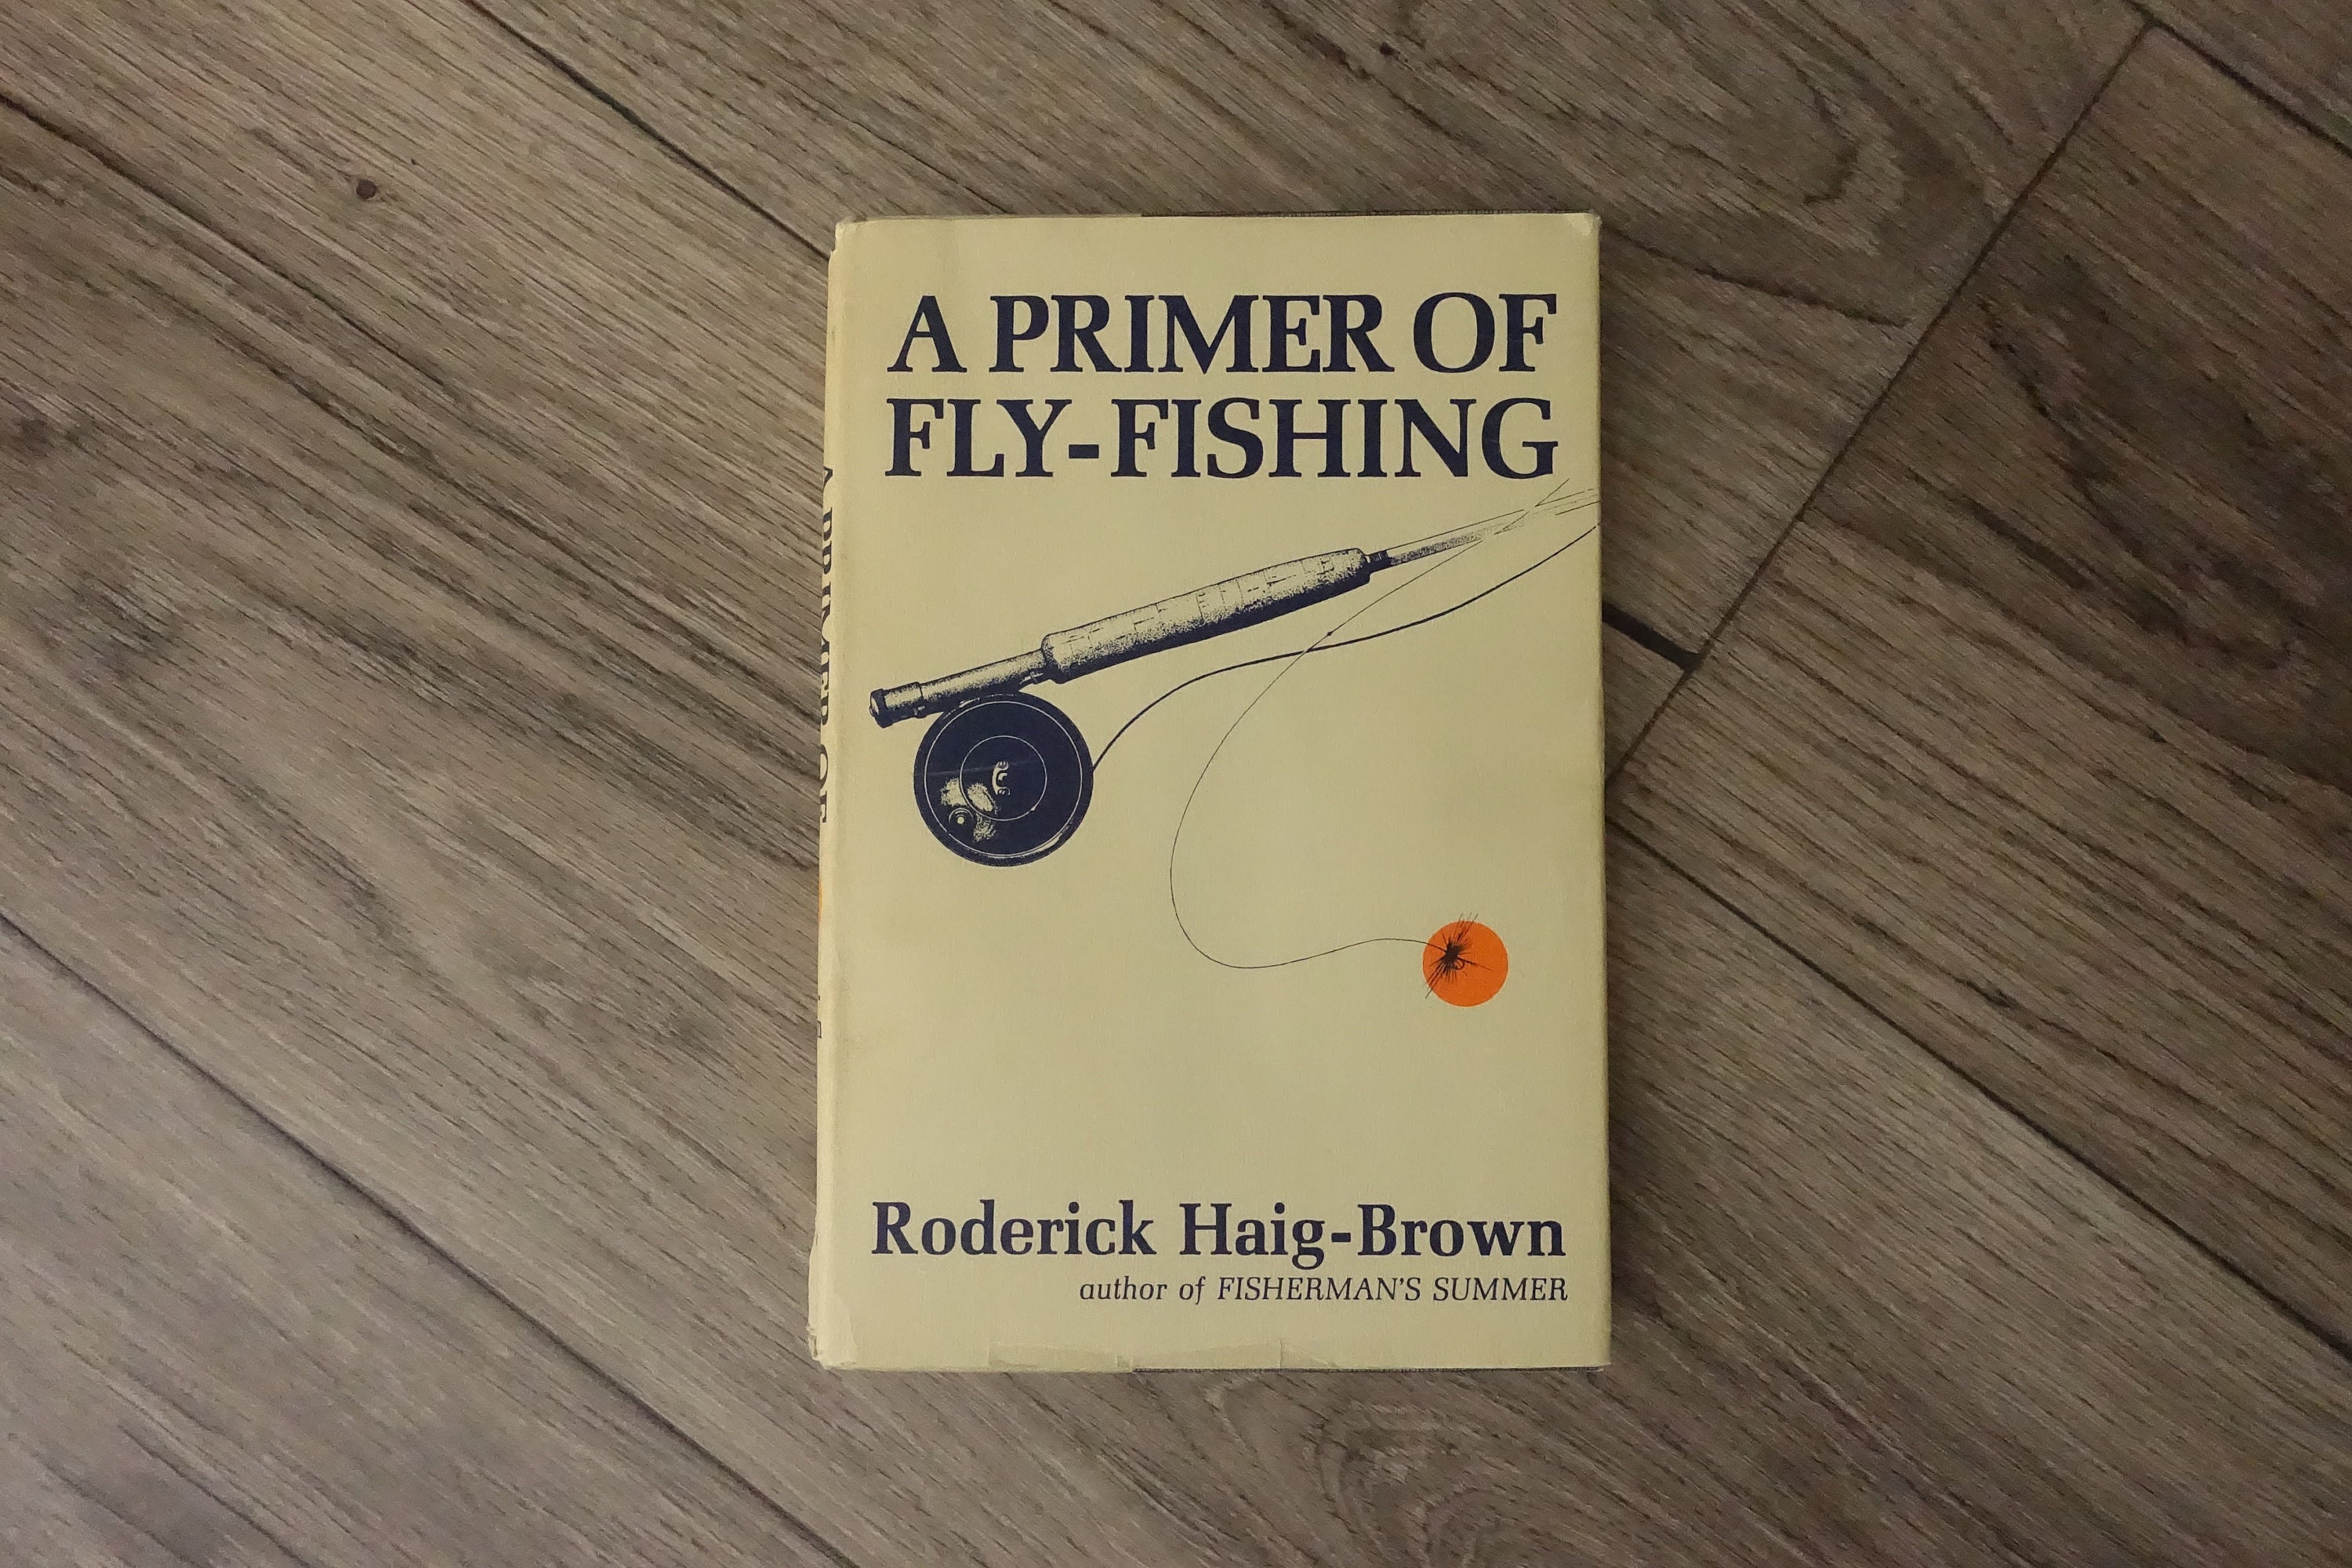 A Primer of Fly-fishing by Roderick Haig-brown Hardcover 1964 Fishing How  to Guide Book 